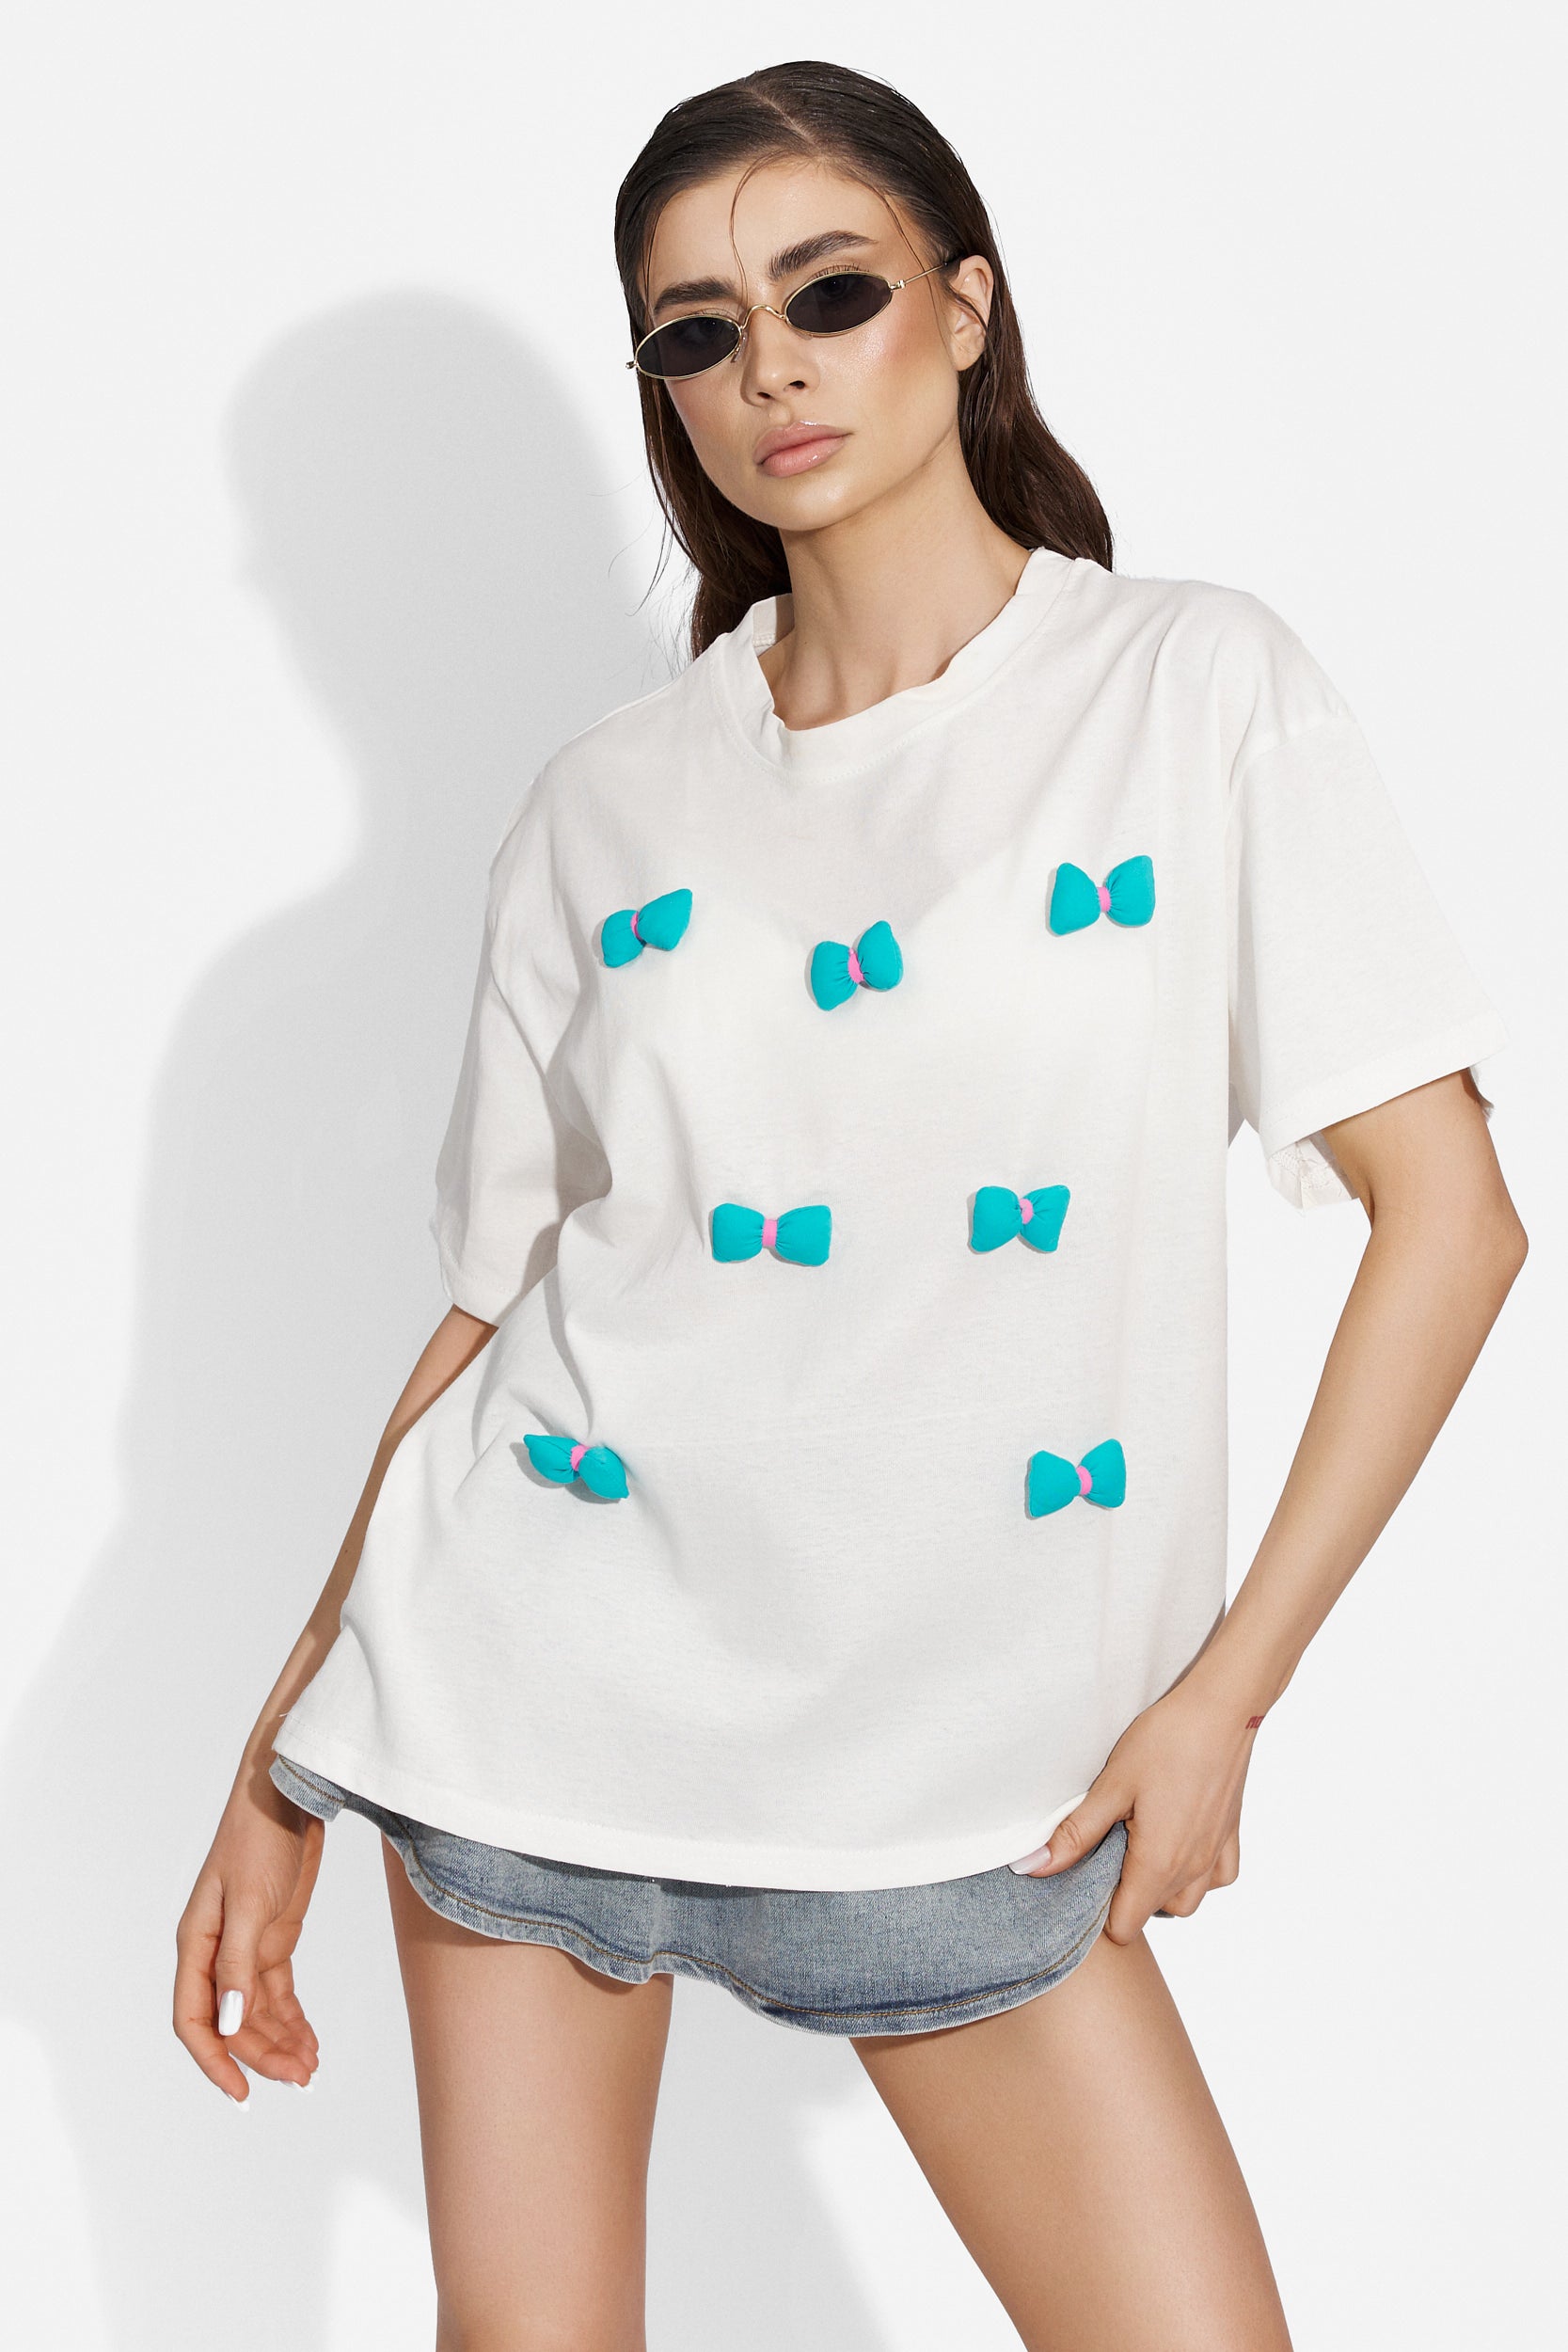 Noutany Bogas casual white ladies t-shirt